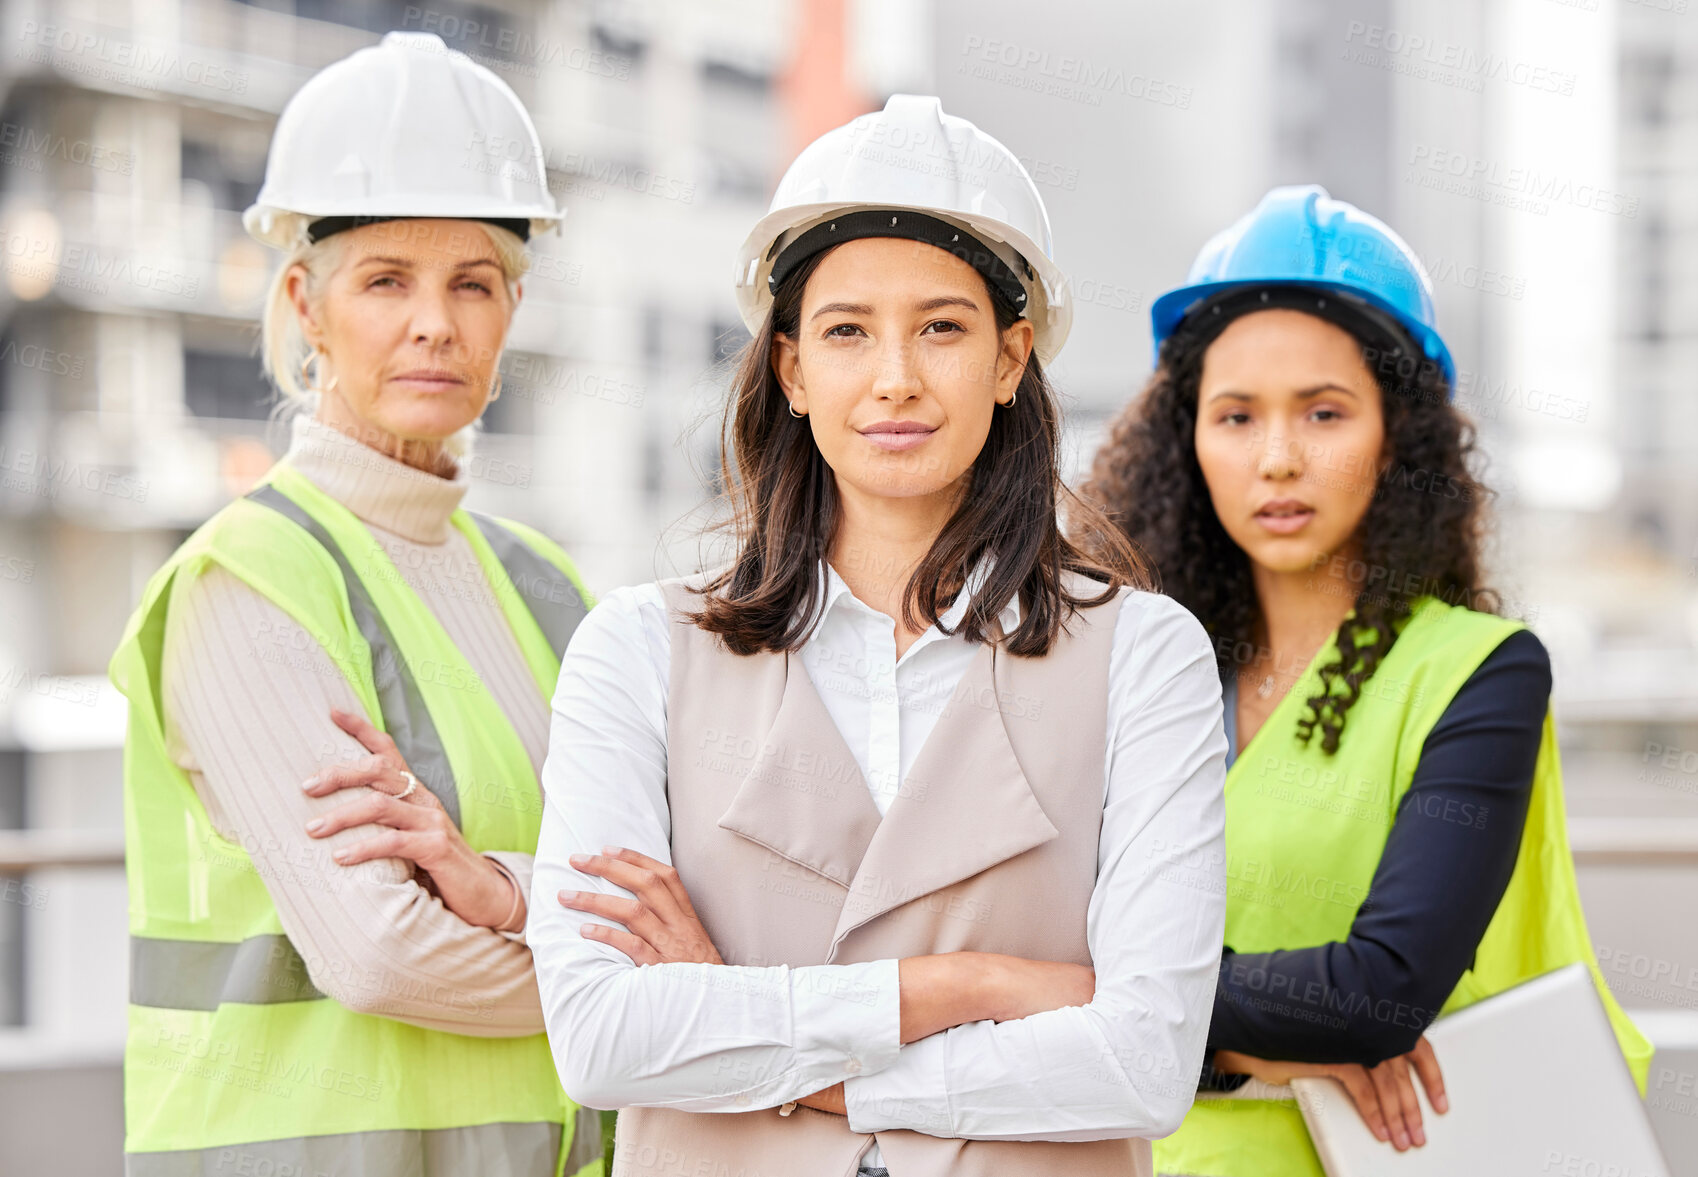 Buy stock photo Cropped portrait of three attractive female engineers standing with their arms folded on a construction site